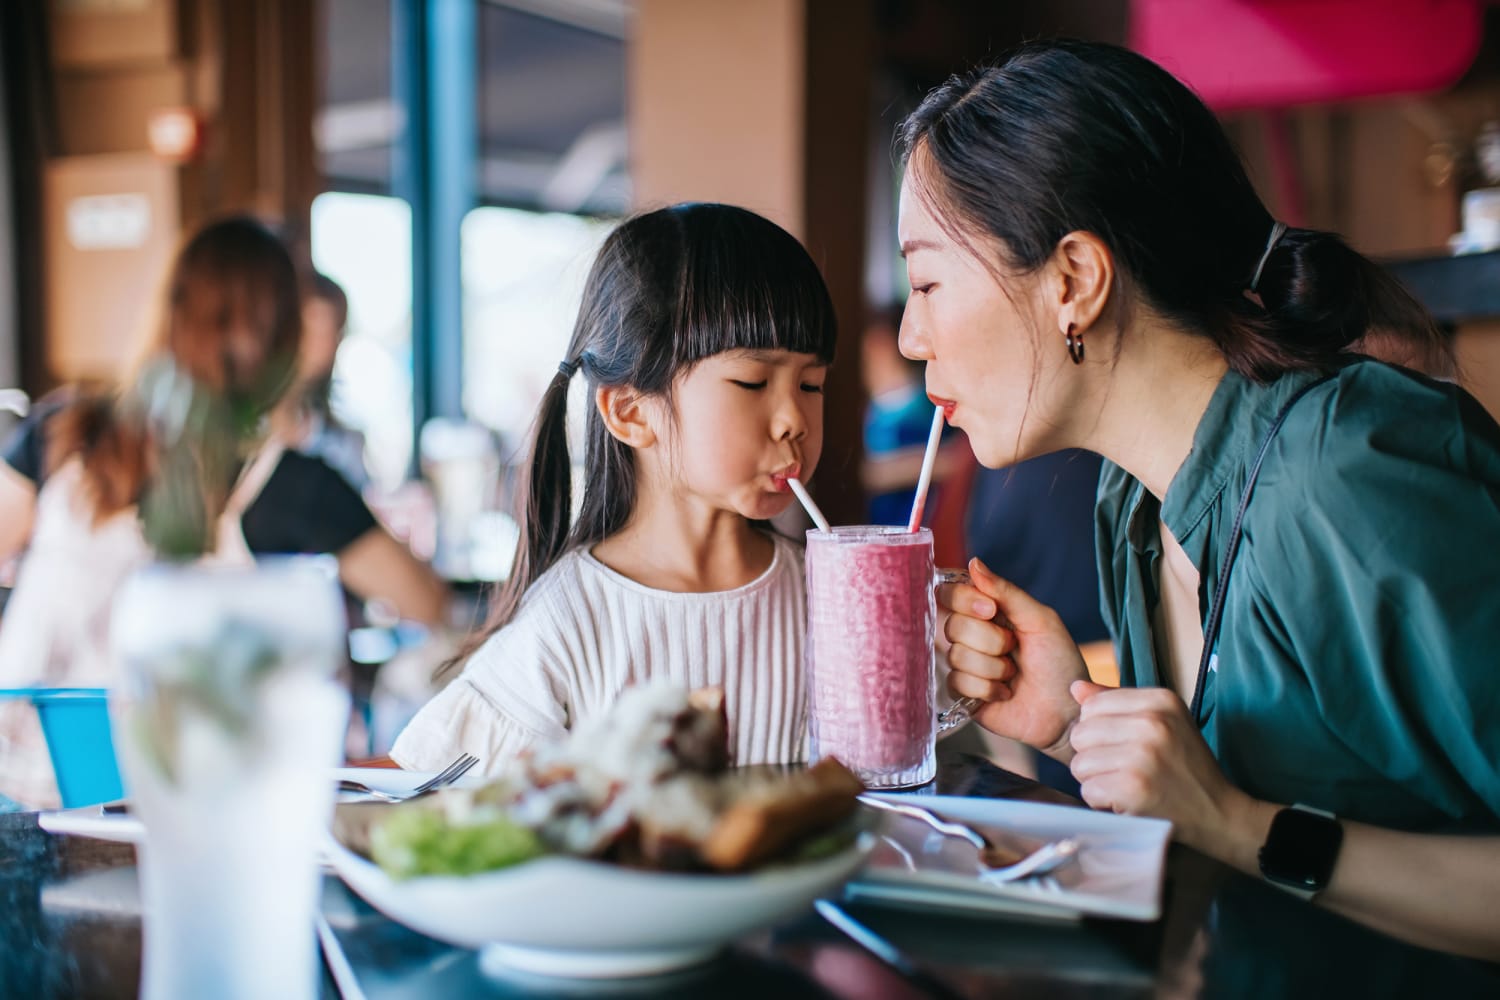 32 Mother's Day Restaurant Deals and Specials 2024